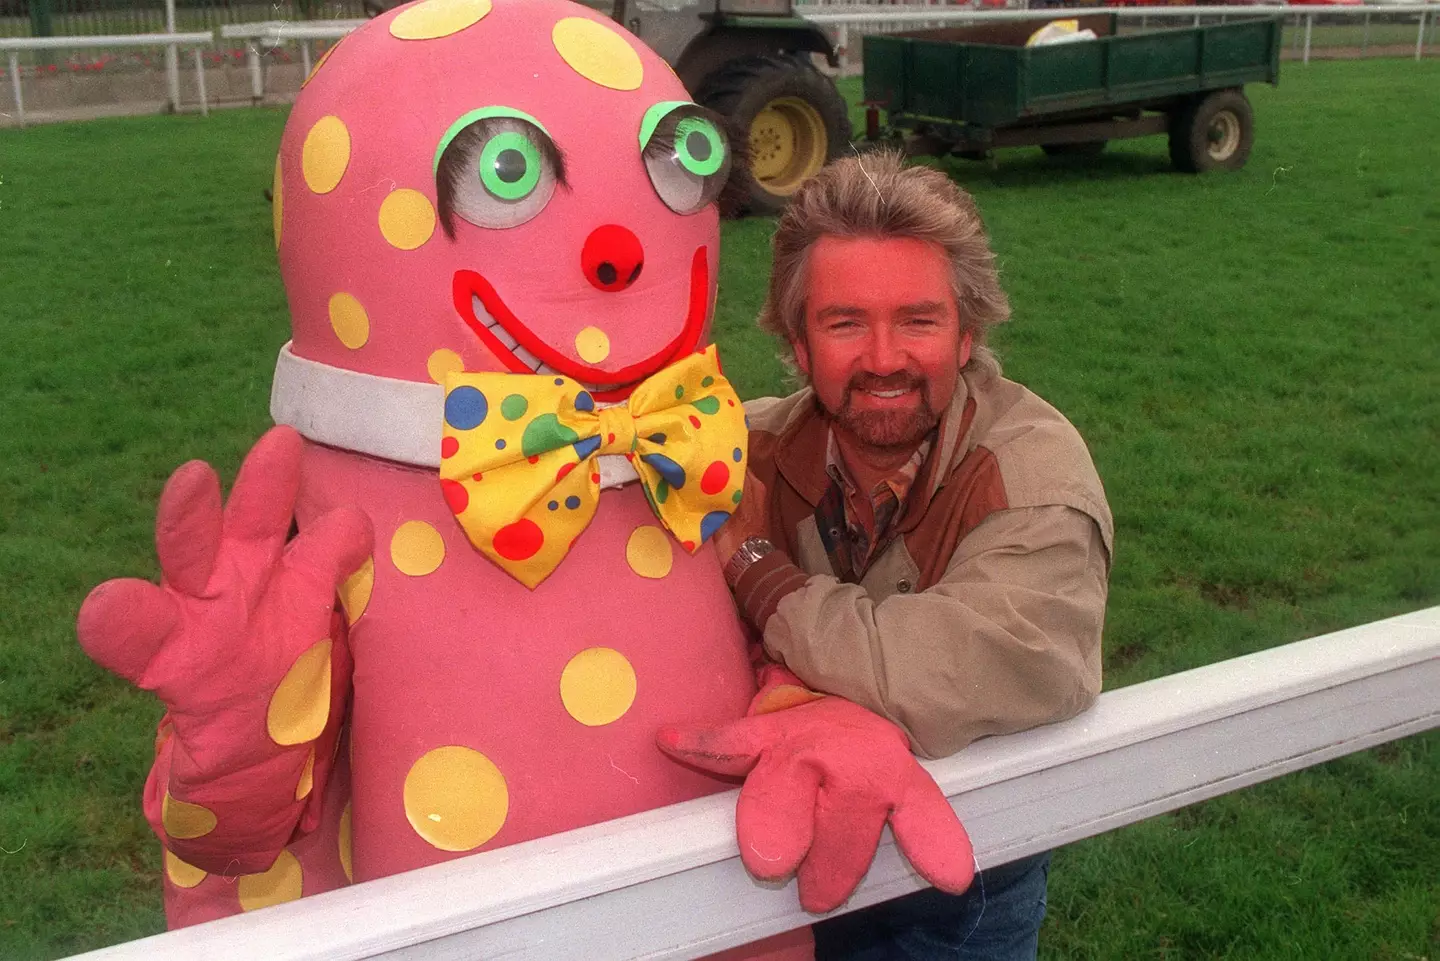 Blobby with his former tag team partner Noel Edmonds.